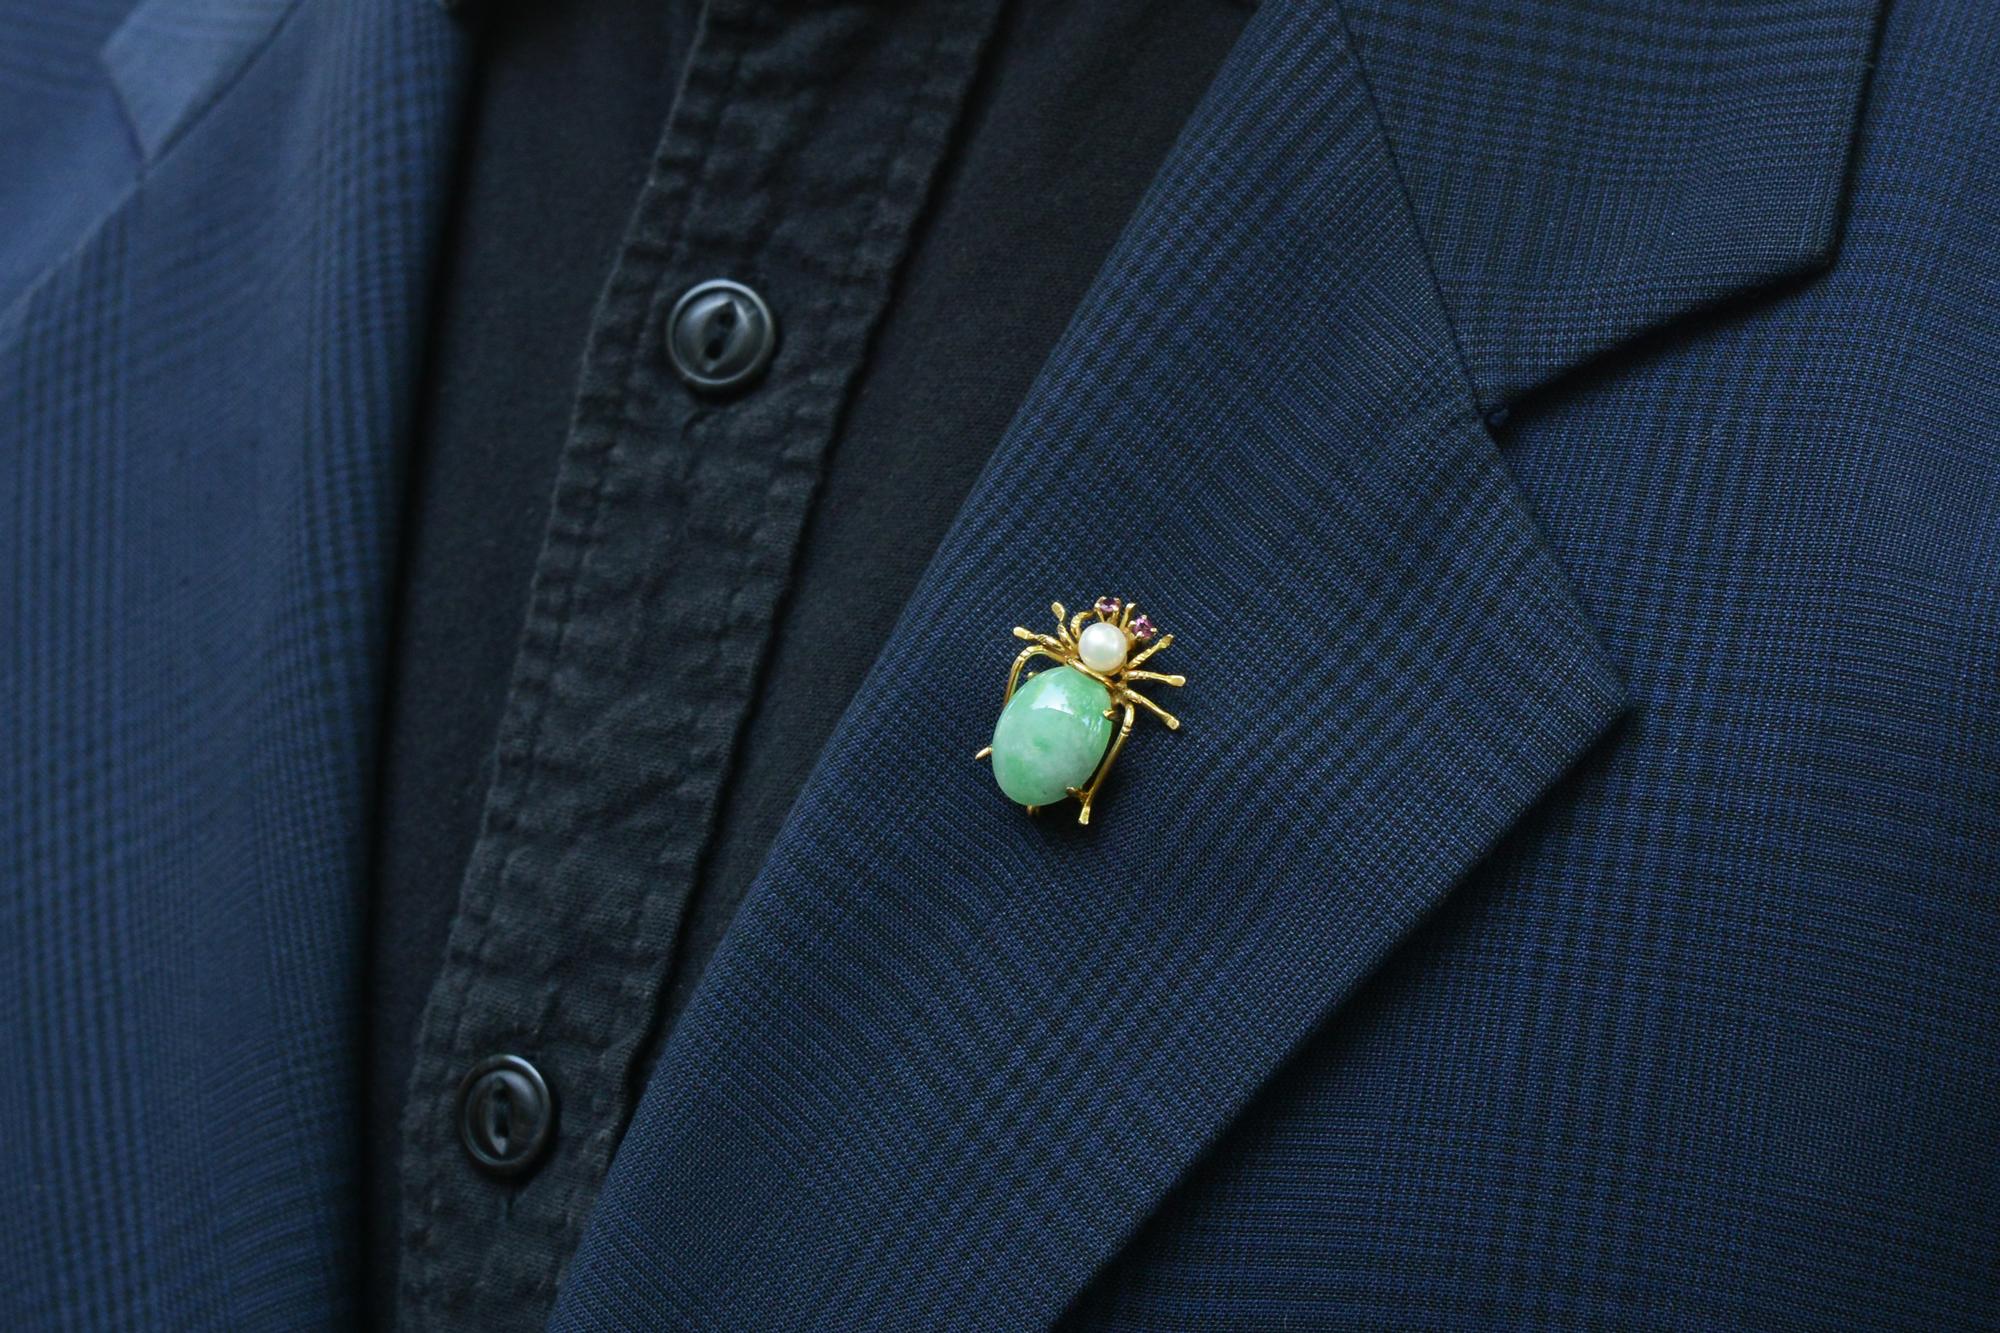 This vintage estate brooch insect pin is the perfect choice for a remarkable gift to yourself or a loved one. The spider comes alive with a bright play of colors including a stunning, natural, untreated Type A jade, a lustrous pearl and pink